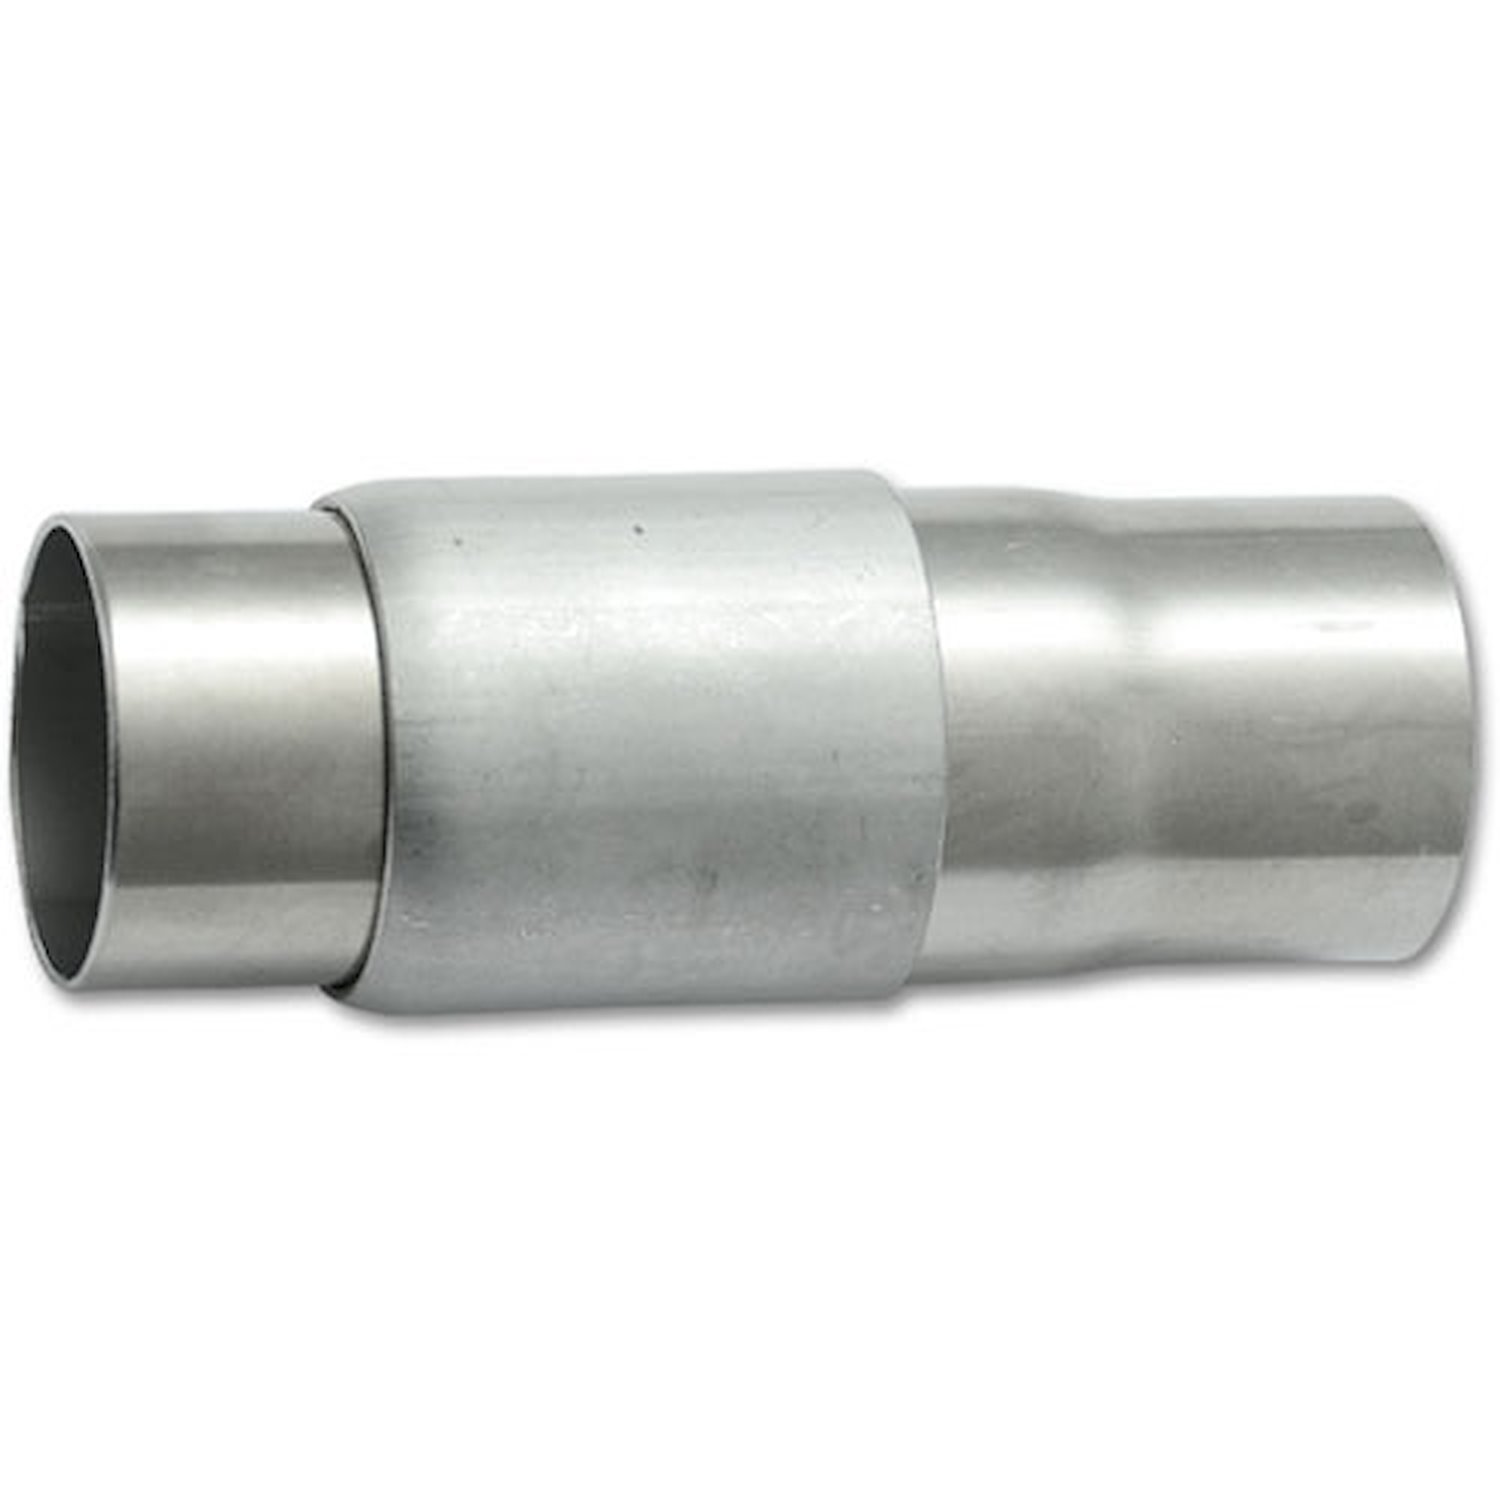 Double Slip Joint Fitting For use with 1-3/4" O.D. Tubing